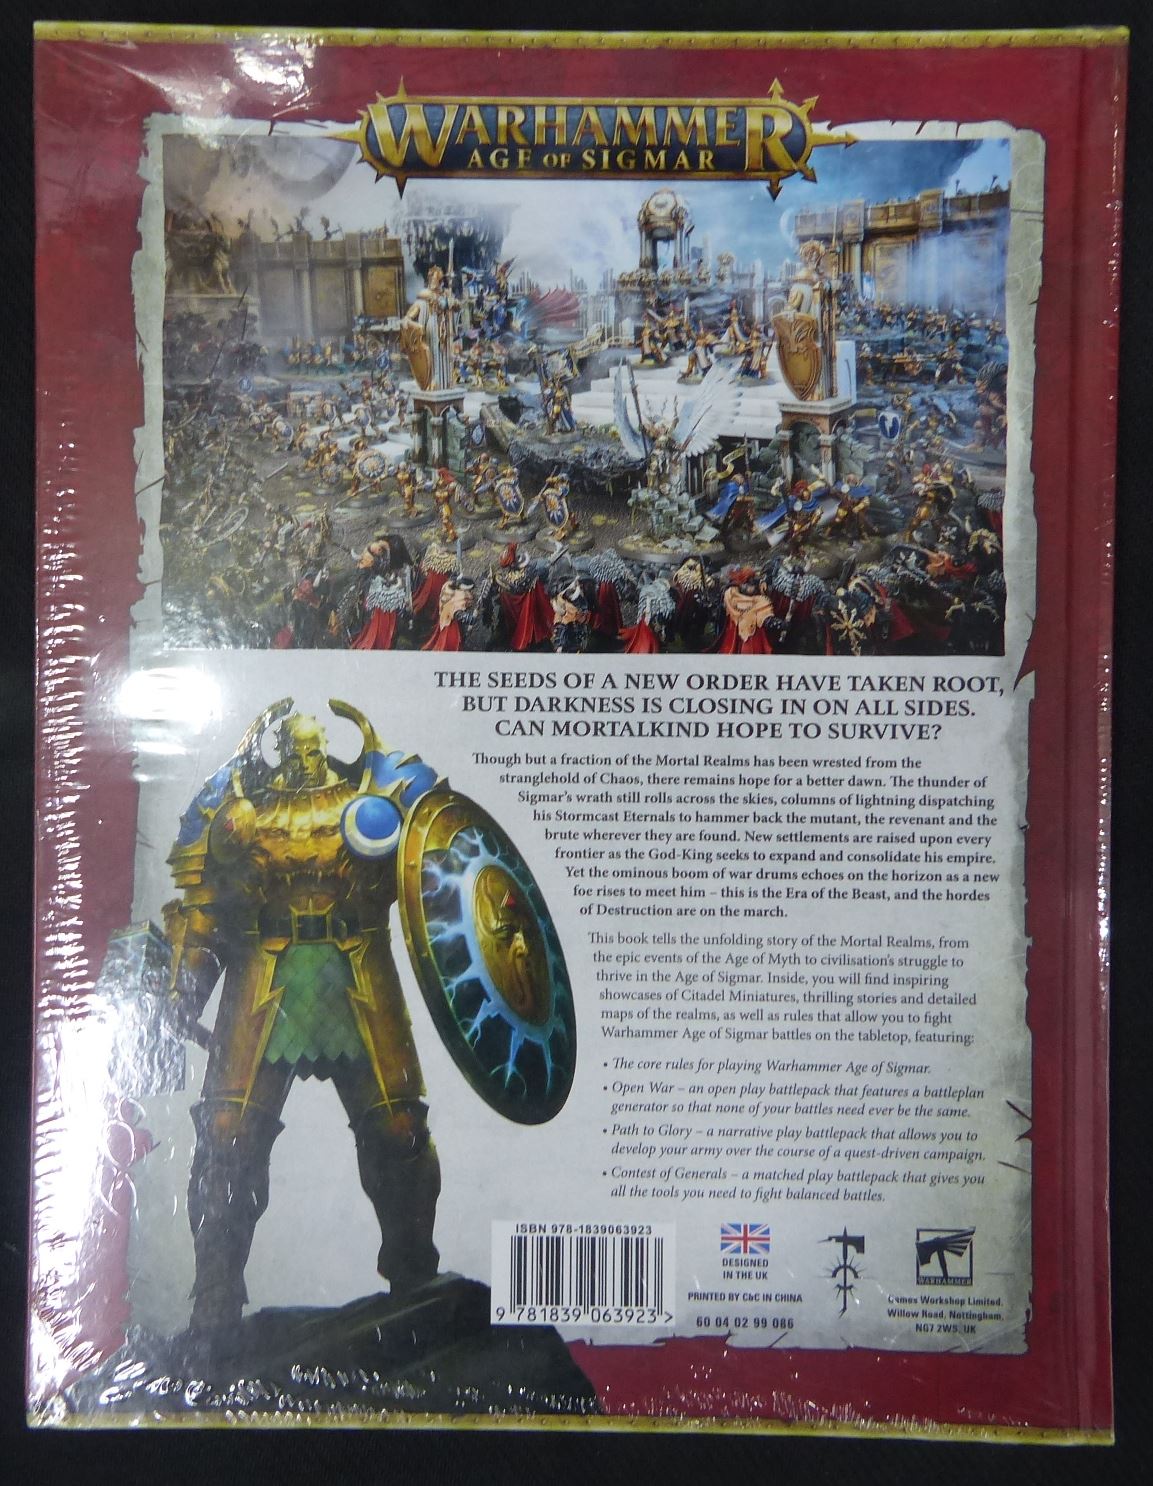 Age of Sigmar Core Book - Warhammer AoS 40k #3A6